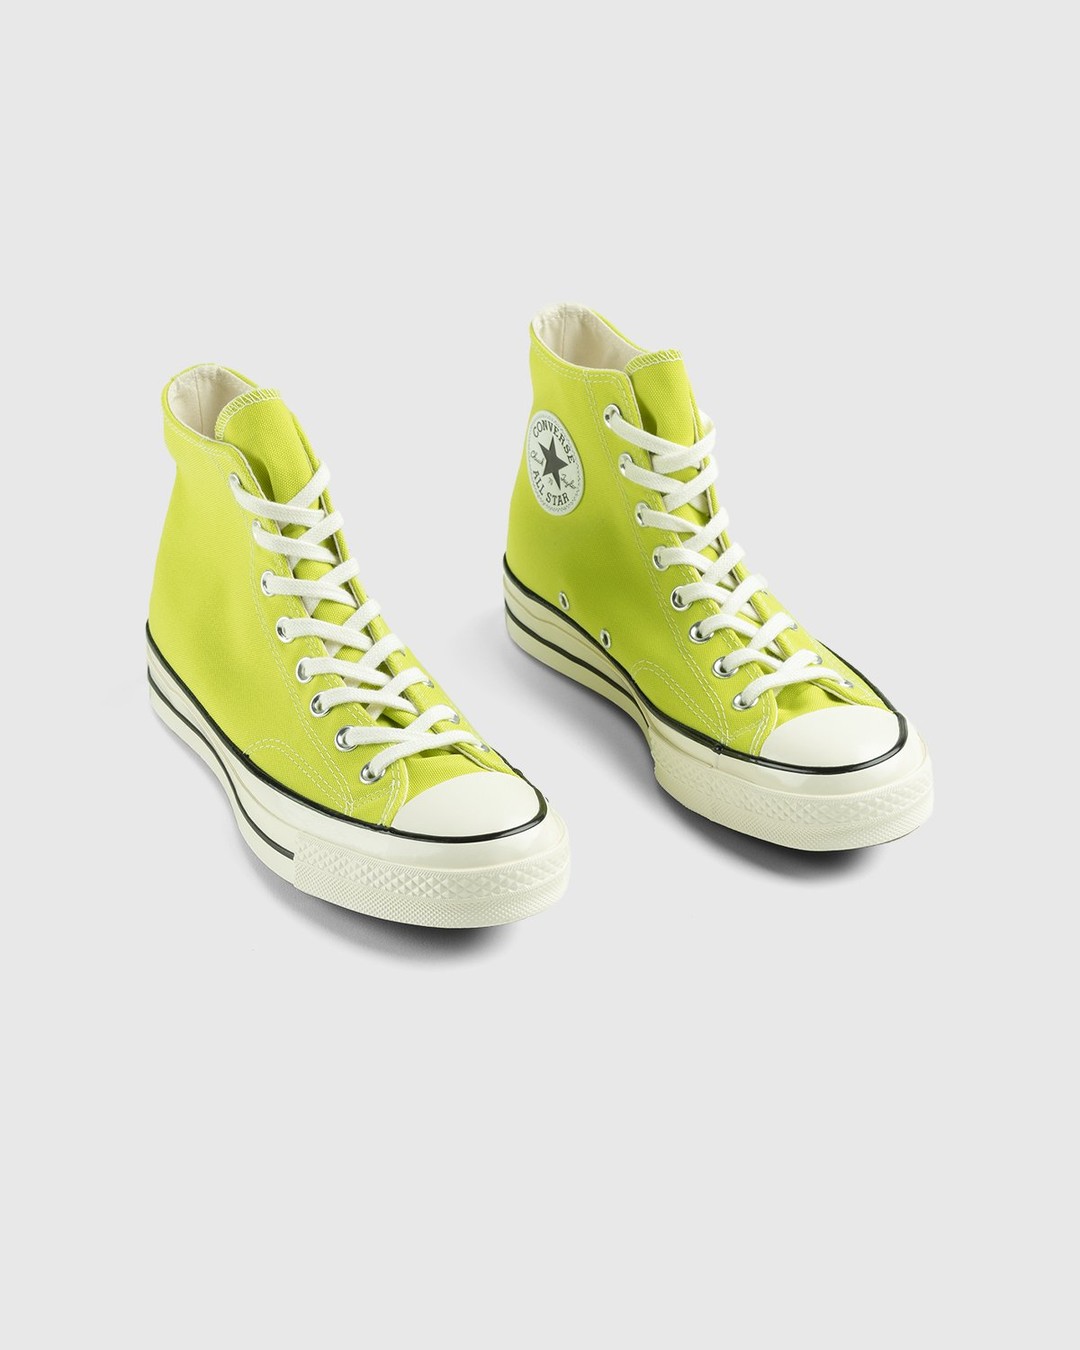 Converse – Chuck 70 Lime Twist Egret Black - Sneakers - Yellow - Image 3